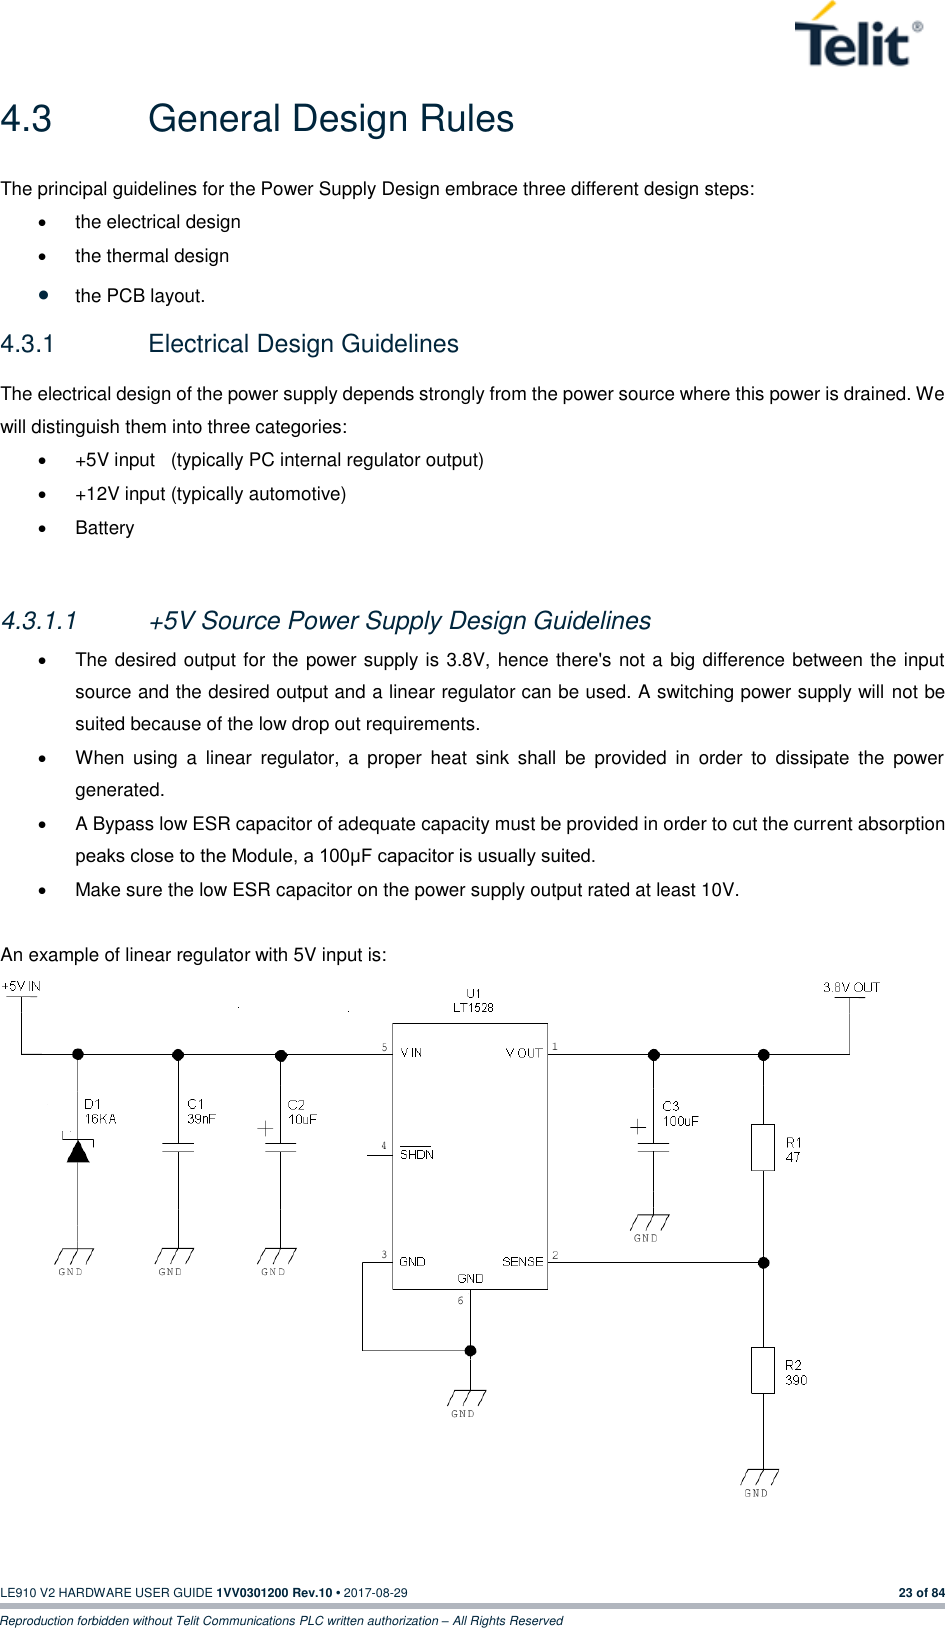   LE910 V2 HARDWARE USER GUIDE 1VV0301200 Rev.10 • 2017-08-29  23 of 84 Reproduction forbidden without Telit Communications PLC written authorization – All Rights Reserved 4.3  General Design Rules The principal guidelines for the Power Supply Design embrace three different design steps: •  the electrical design •  the thermal design • the PCB layout. 4.3.1  Electrical Design Guidelines The electrical design of the power supply depends strongly from the power source where this power is drained. We will distinguish them into three categories: •  +5V input   (typically PC internal regulator output) •  +12V input (typically automotive) •  Battery  4.3.1.1  +5V Source Power Supply Design Guidelines •  The desired output for the power supply is 3.8V, hence there&apos;s not a big difference between the input source and the desired output and a linear regulator can be used. A switching power supply will not be suited because of the low drop out requirements. •  When  using  a  linear  regulator,  a  proper  heat  sink  shall  be  provided  in  order  to  dissipate  the  power generated. •  A Bypass low ESR capacitor of adequate capacity must be provided in order to cut the current absorption peaks close to the Module, a 100μF capacitor is usually suited. •  Make sure the low ESR capacitor on the power supply output rated at least 10V.  An example of linear regulator with 5V input is:    